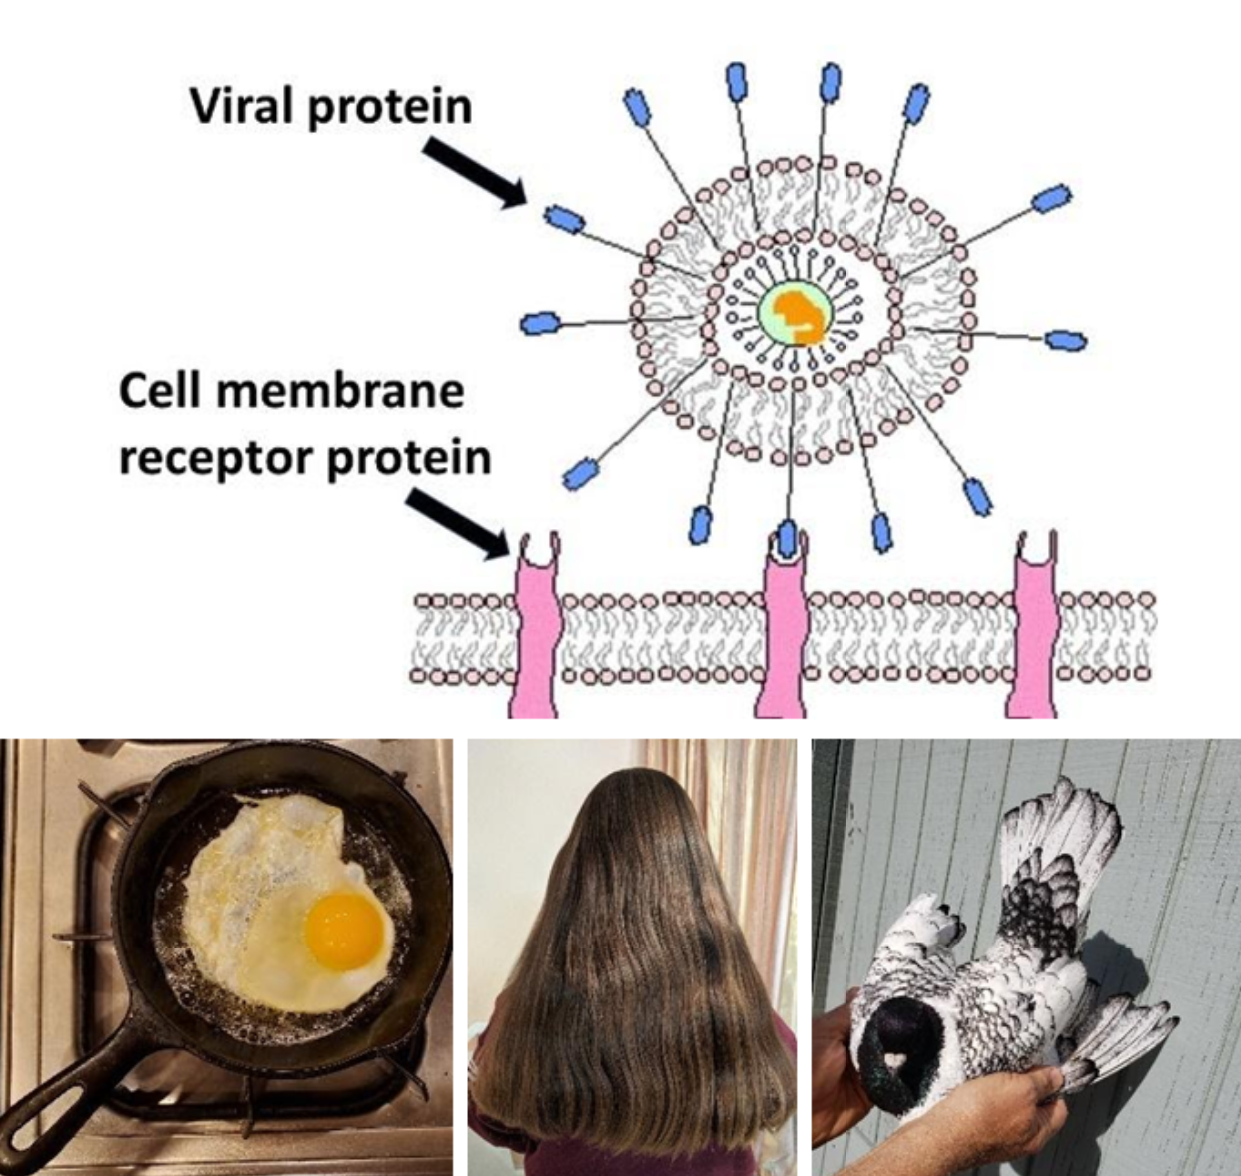 examples of protein: viral ligands and cell receptors, egg, human hair, feathers on a bird